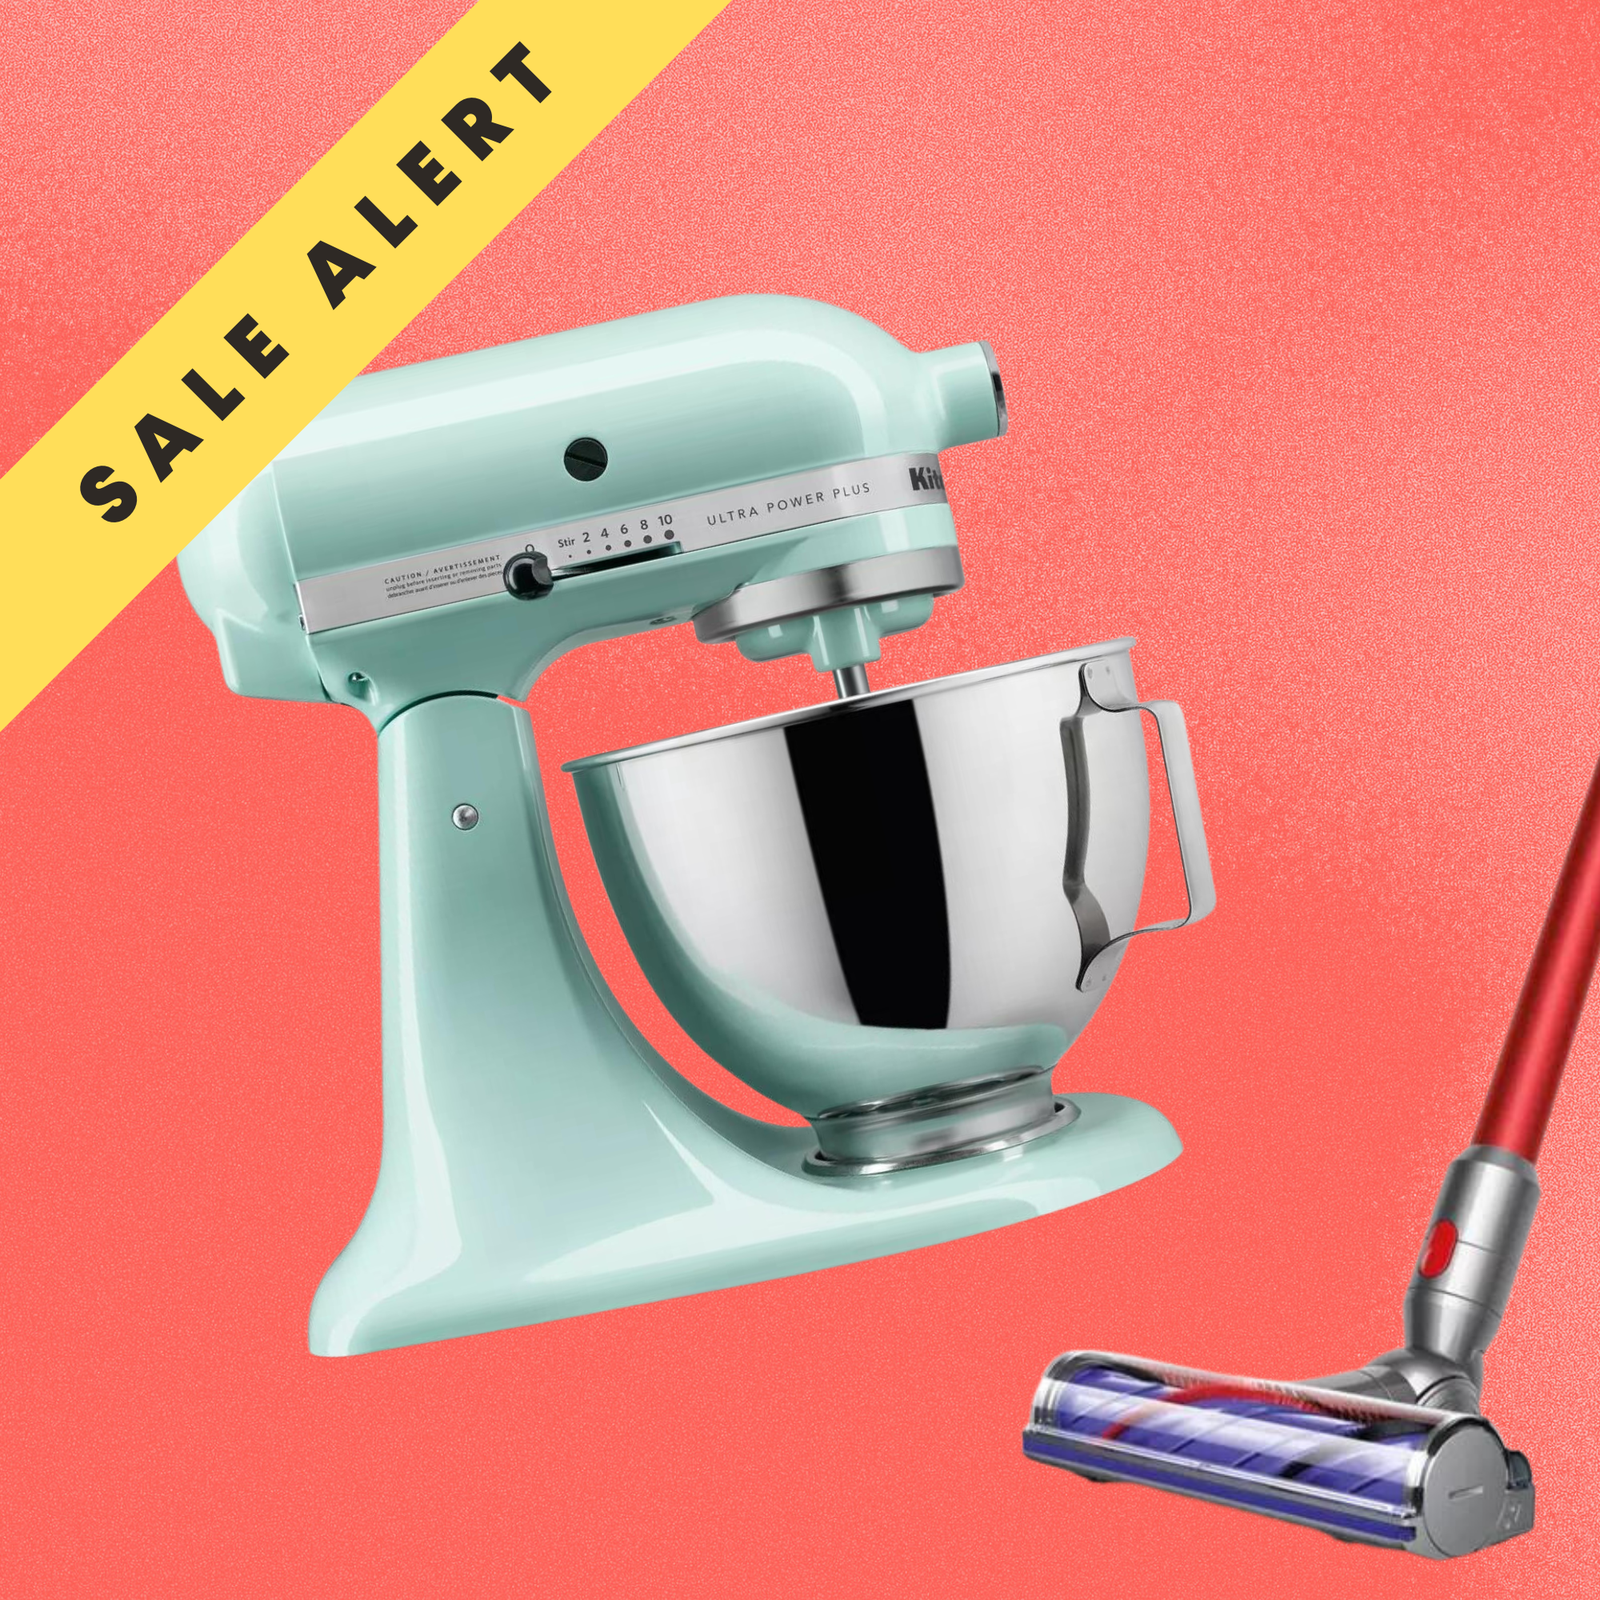 21 Early Deals You Can Shop Before Target’s Massive Circle Week Sale